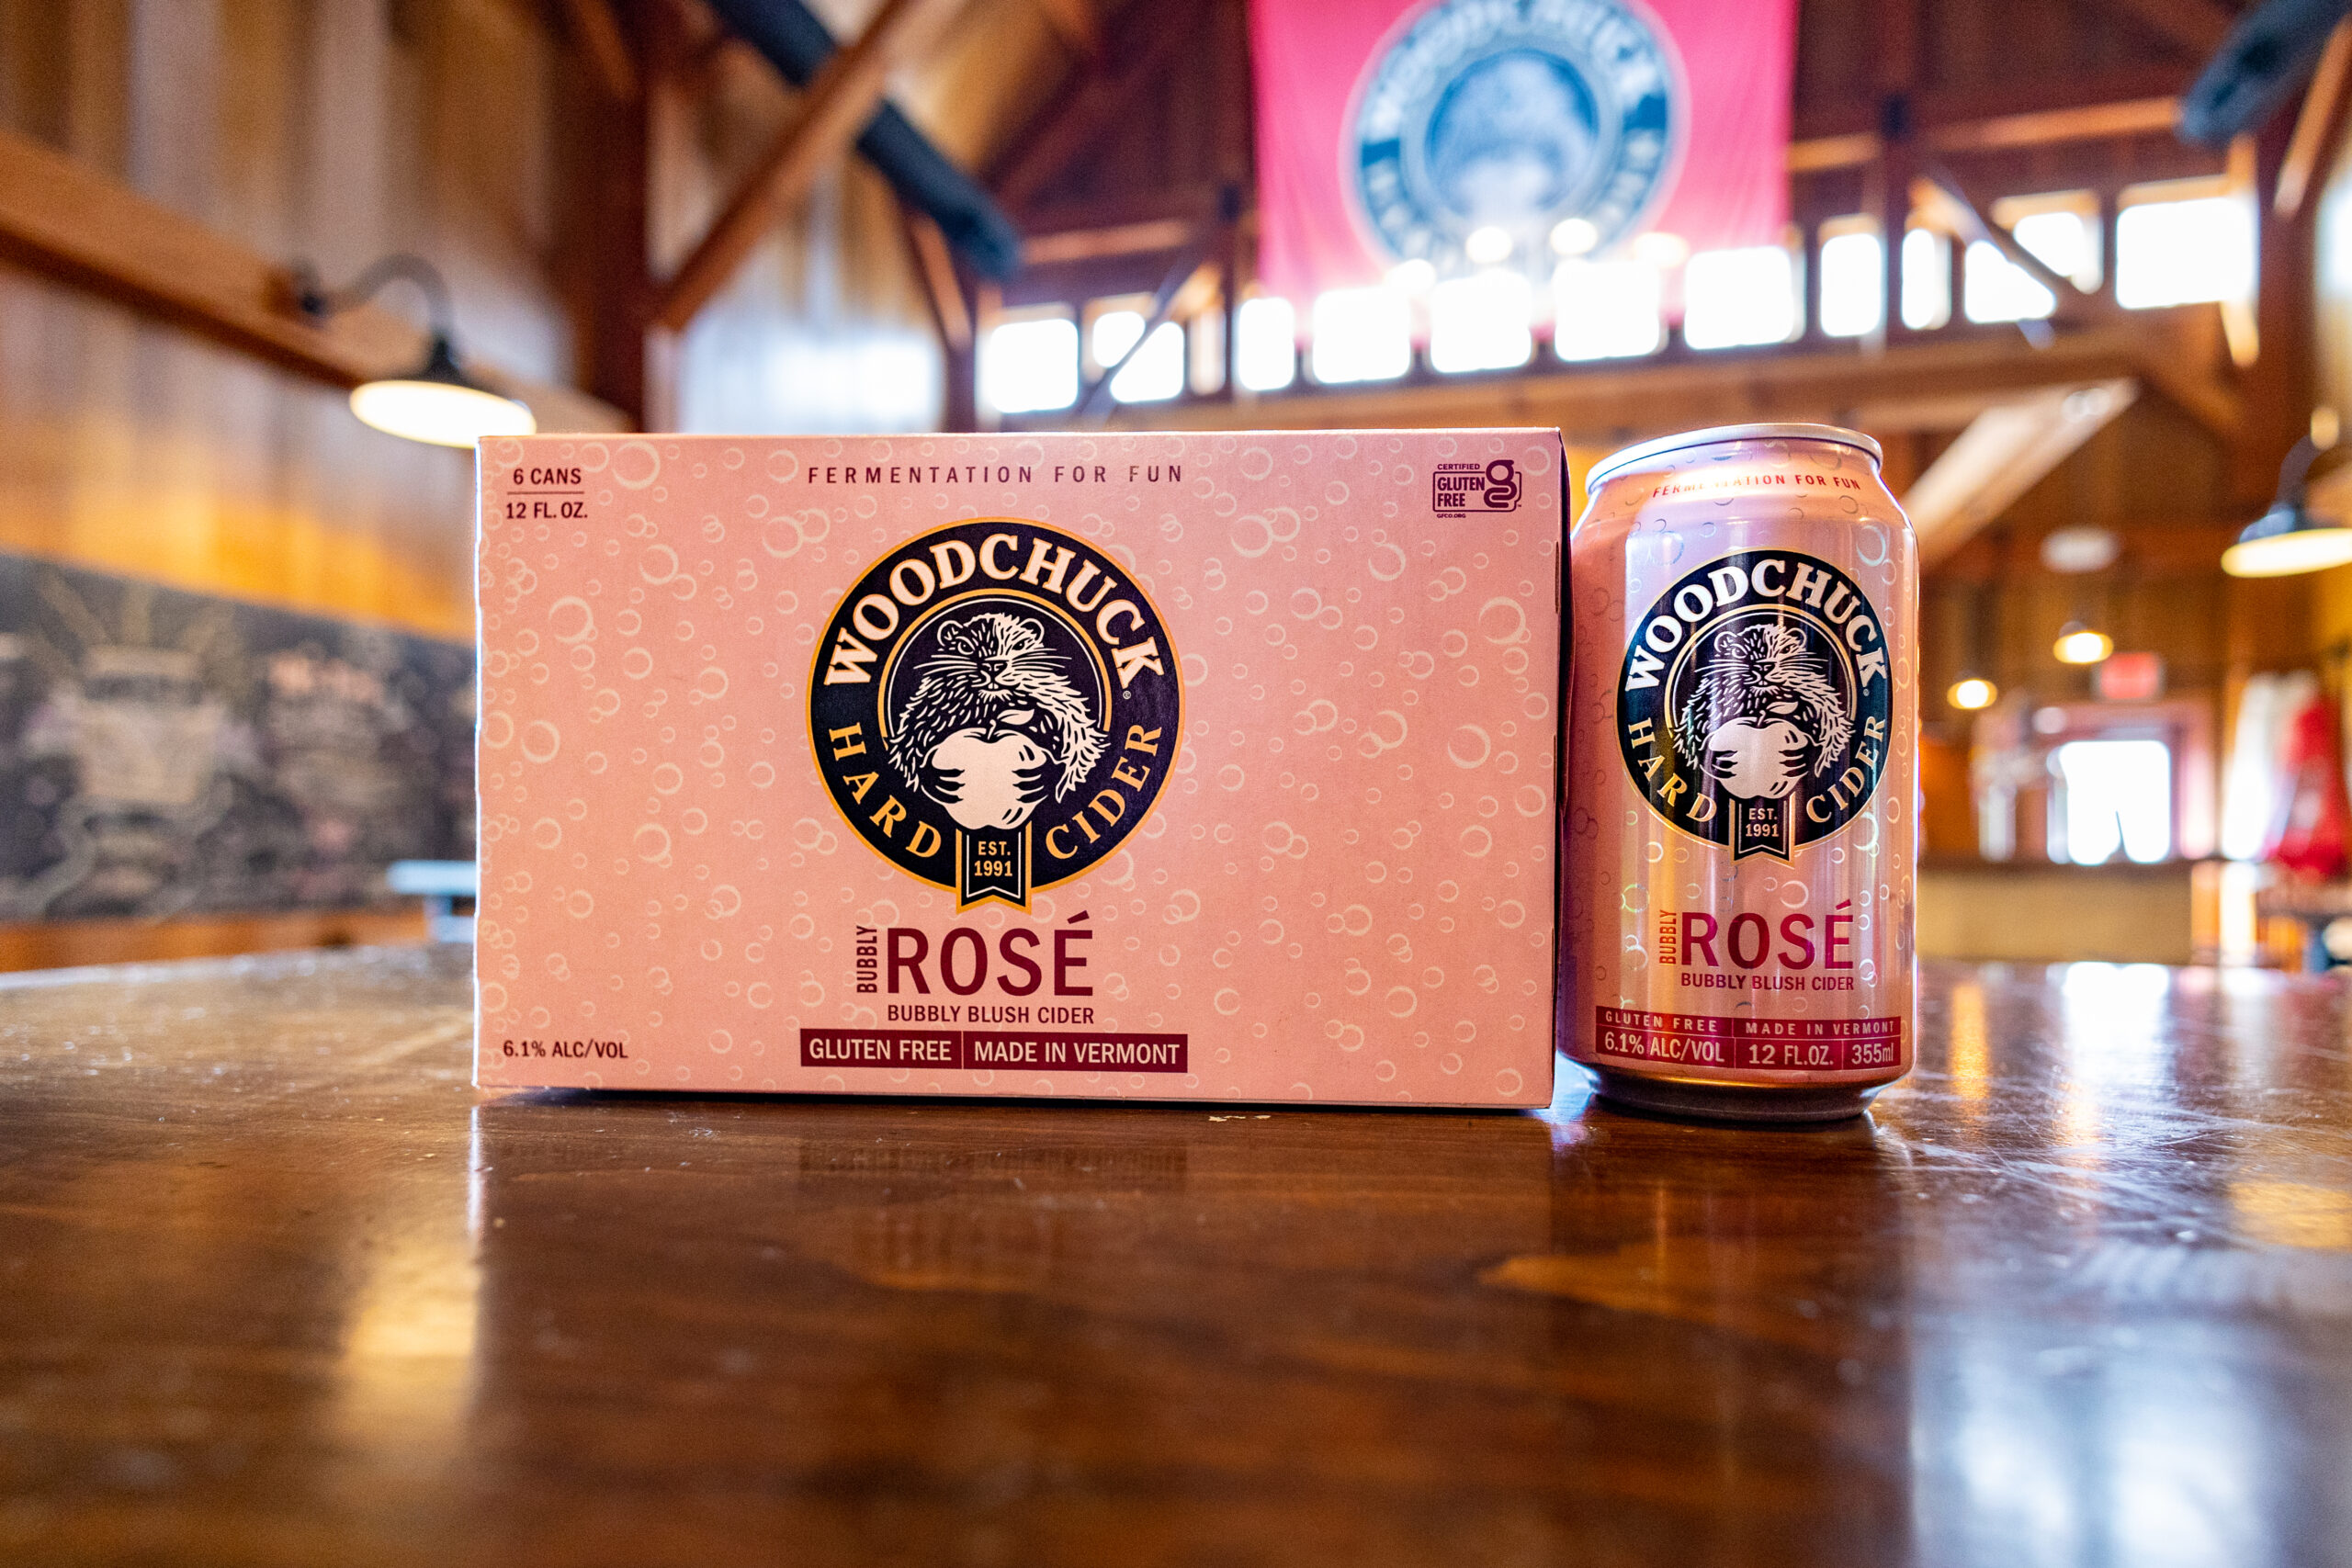 Woodchuck Bubbly Rosé Hard Cider - Bubbly Blush Cider 12 oz can next to a 6 pack